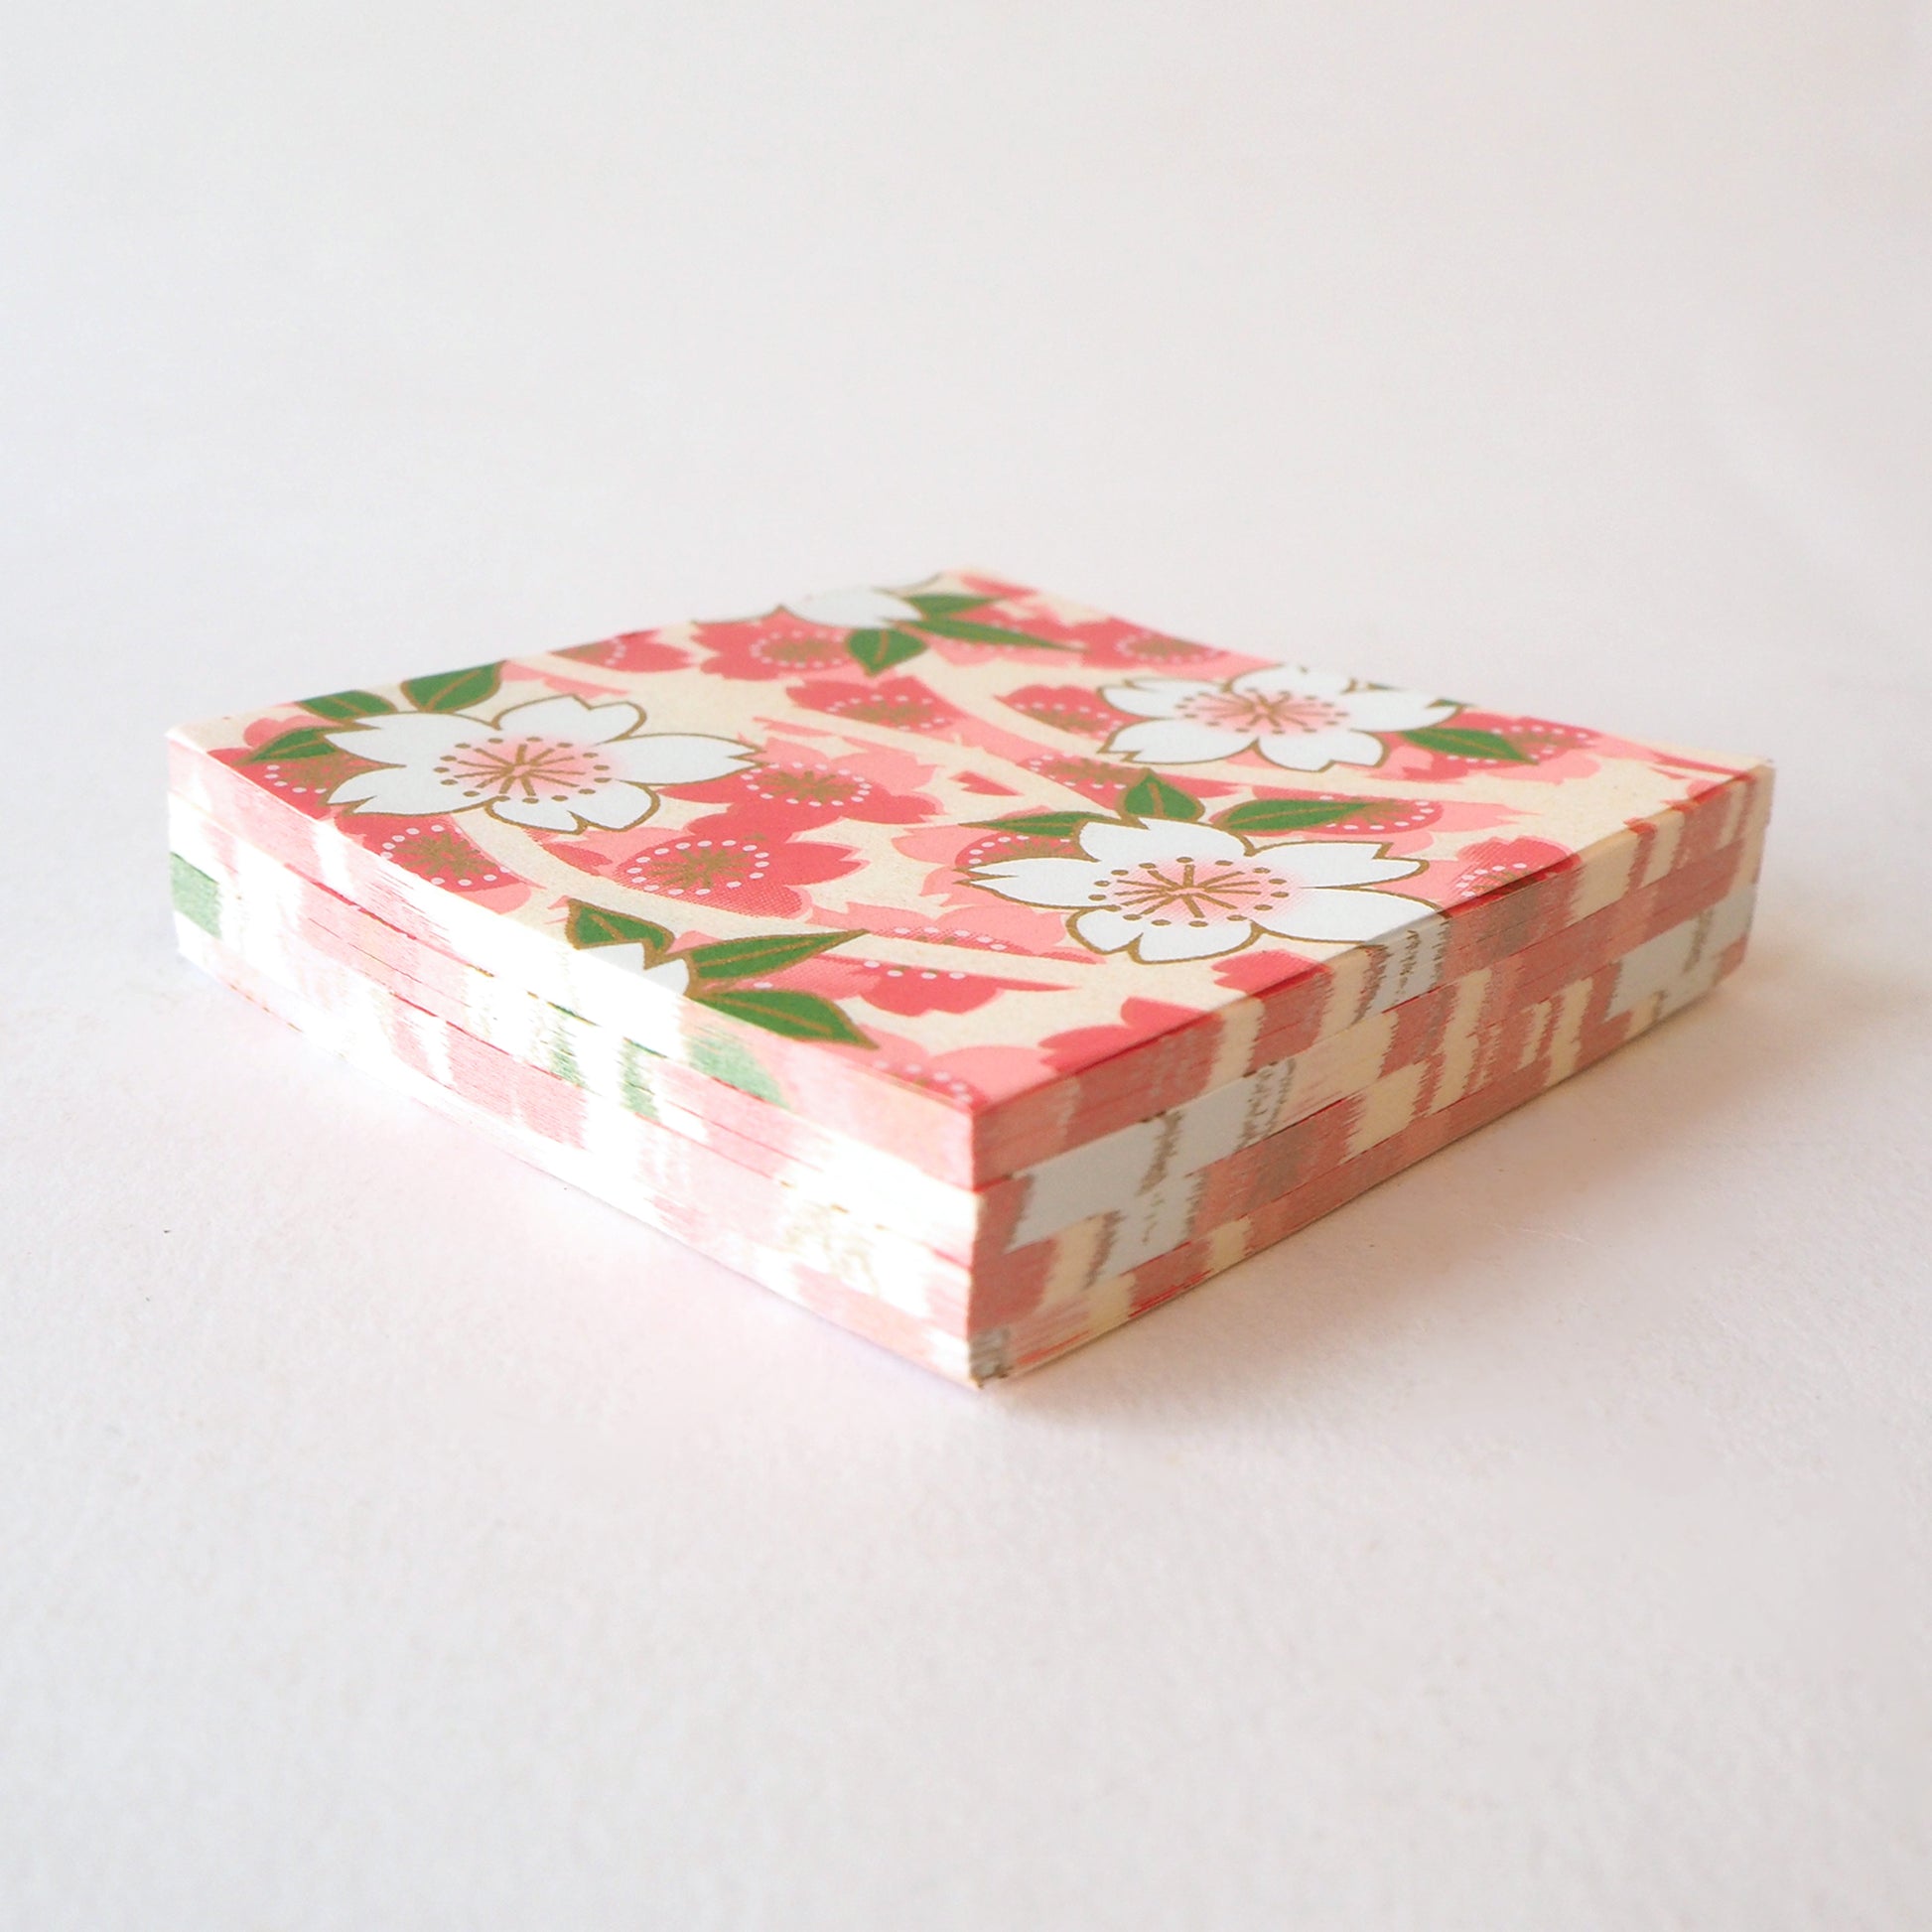 Pack of 100 Sheets 7x7cm Yuzen Washi Origami Paper HZ-412 - Big Cherry Blossom Pink - washi paper - Lavender Home London